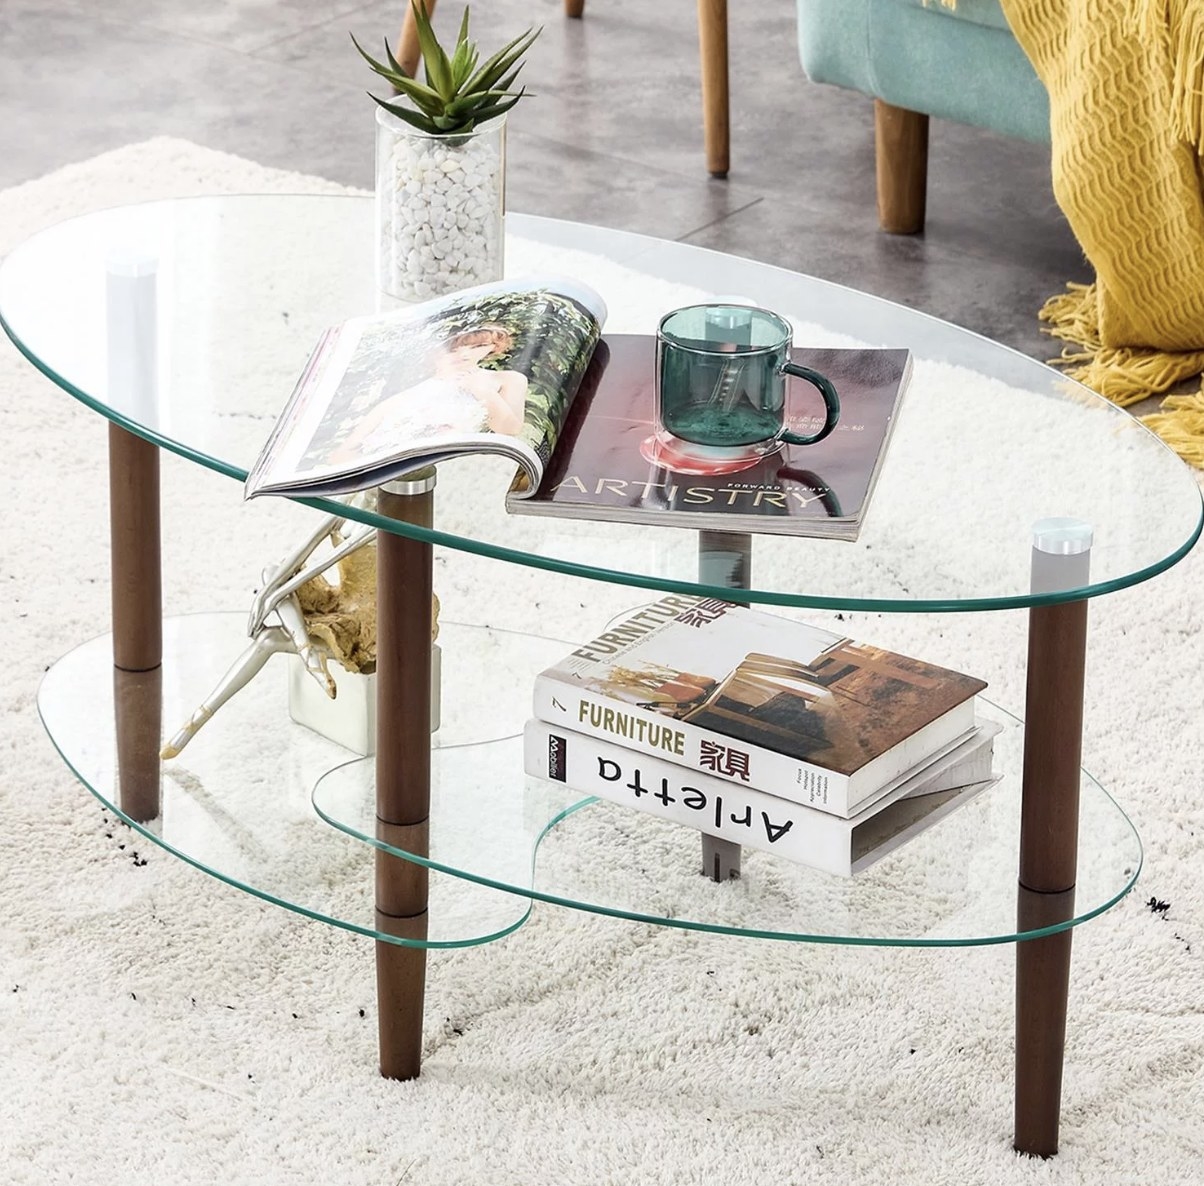 The coffee table in the center of the room